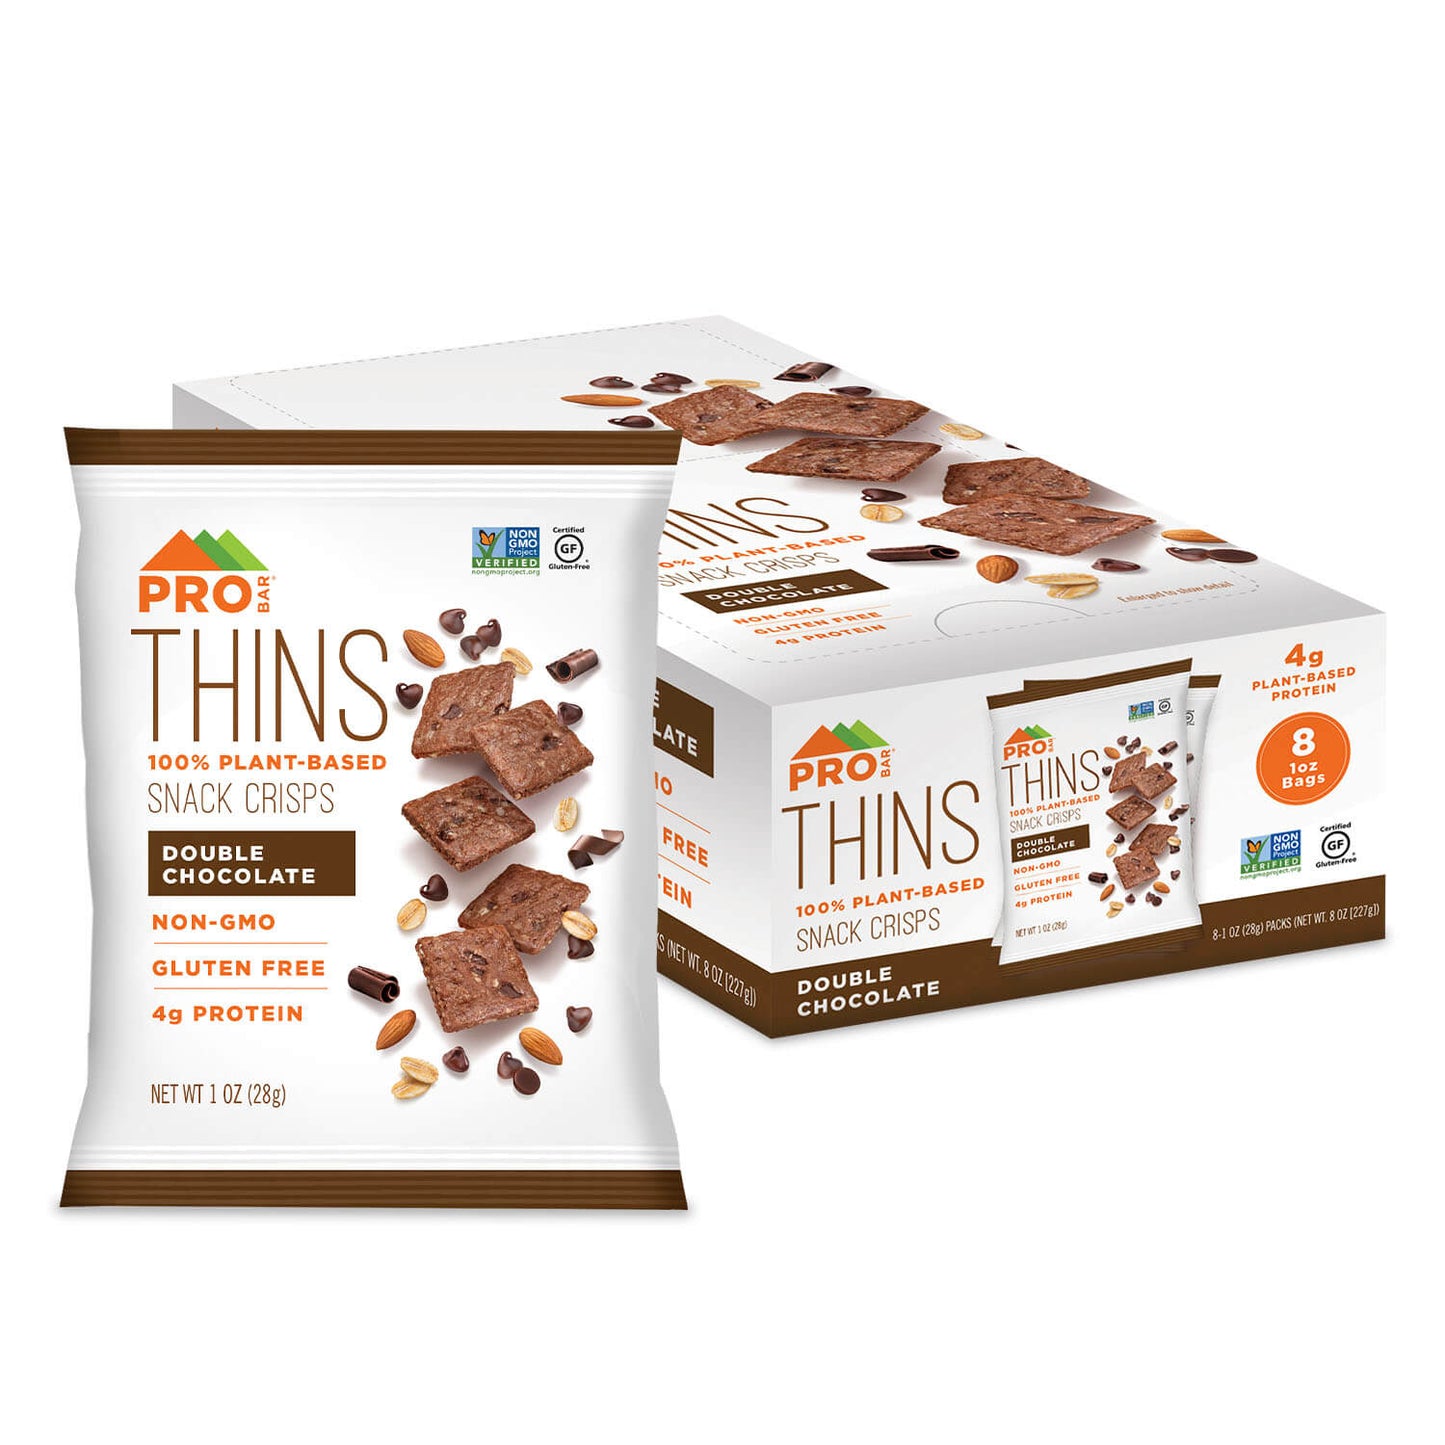 Double Chocolate THINS 1 oz. 8 Pack